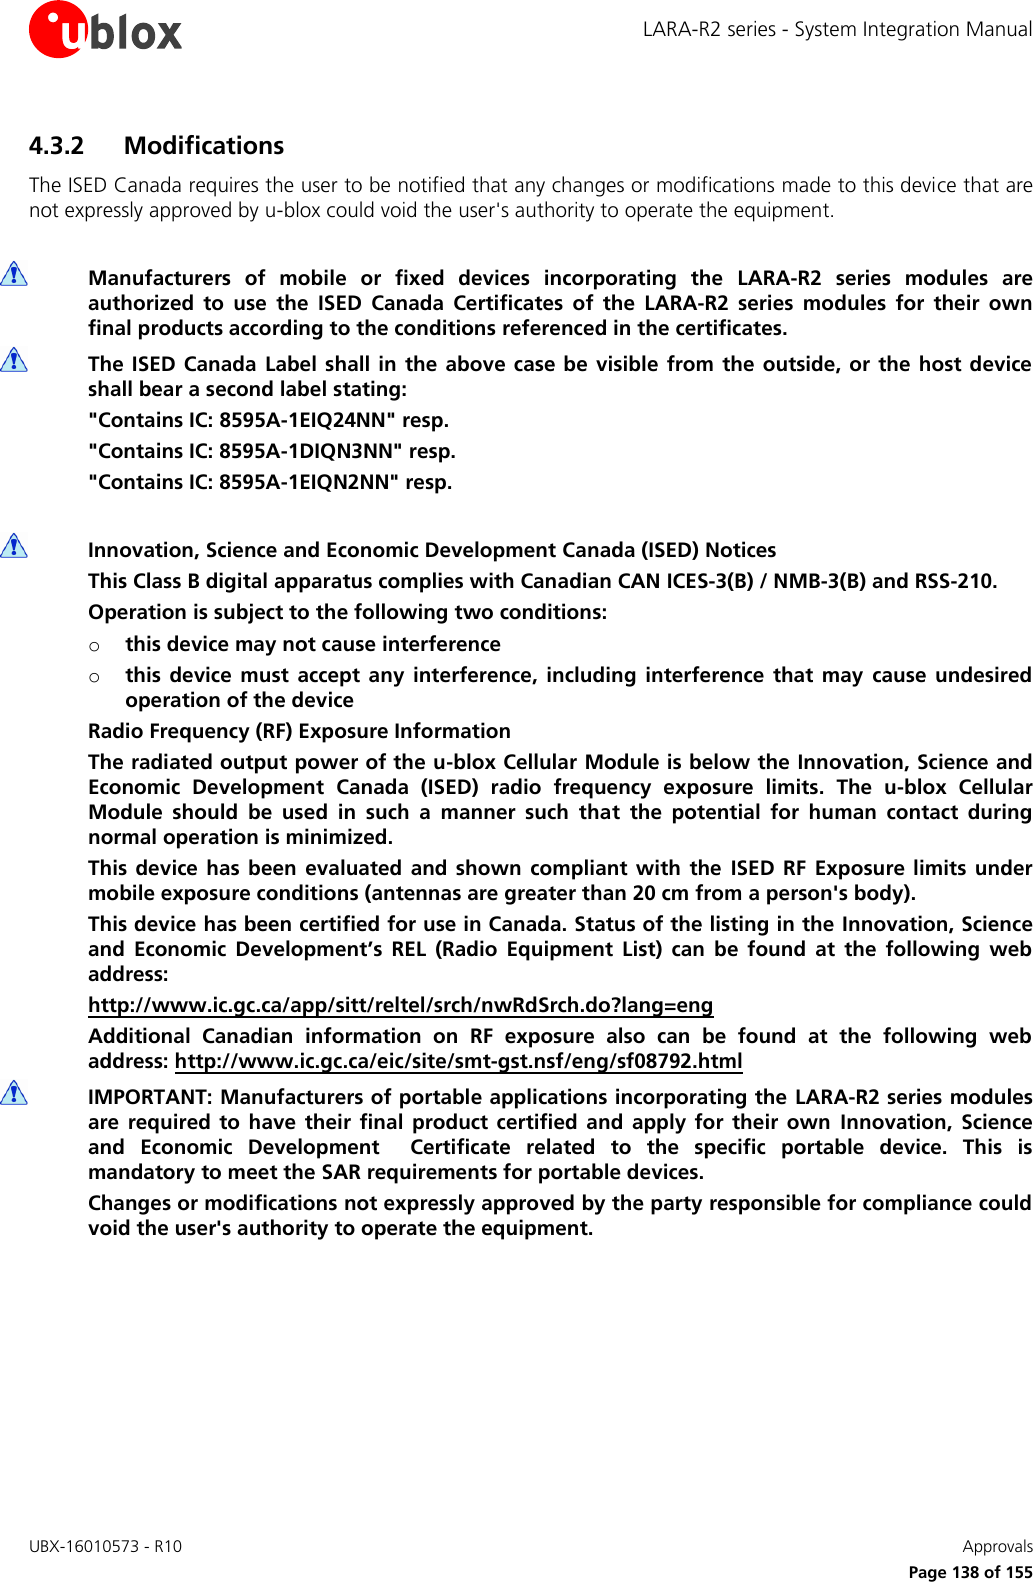 LARA-R2 series - System Integration Manual UBX-16010573 - R10    Approvals     Page 138 of 155 4.3.2 Modifications The ISED Canada requires the user to be notified that any changes or modifications made to this device that are not expressly approved by u-blox could void the user&apos;s authority to operate the equipment.   Manufacturers  of  mobile  or  fixed  devices  incorporating  the  LARA-R2  series  modules  are authorized  to  use  the  ISED  Canada  Certificates  of  the  LARA-R2  series  modules  for  their  own final products according to the conditions referenced in the certificates.  The ISED  Canada  Label shall in the above case be visible  from the outside, or  the host device shall bear a second label stating: &quot;Contains IC: 8595A-1EIQ24NN&quot; resp. &quot;Contains IC: 8595A-1DIQN3NN&quot; resp. &quot;Contains IC: 8595A-1EIQN2NN&quot; resp.   Innovation, Science and Economic Development Canada (ISED) Notices This Class B digital apparatus complies with Canadian CAN ICES-3(B) / NMB-3(B) and RSS-210. Operation is subject to the following two conditions: o this device may not cause interference o this  device  must  accept  any  interference,  including  interference  that  may  cause  undesired operation of the device Radio Frequency (RF) Exposure Information The radiated output power of the u-blox Cellular Module is below the Innovation, Science and Economic  Development  Canada  (ISED)  radio  frequency  exposure  limits.  The  u-blox  Cellular Module  should  be  used  in  such  a  manner  such  that  the  potential  for  human  contact  during normal operation is minimized. This device  has been  evaluated  and shown  compliant  with  the  ISED  RF  Exposure  limits  under mobile exposure conditions (antennas are greater than 20 cm from a person&apos;s body). This device has been certified for use in Canada. Status of the listing in the Innovation, Science and  Economic  Development’s  REL  (Radio  Equipment  List)  can  be  found  at  the  following  web address: http://www.ic.gc.ca/app/sitt/reltel/srch/nwRdSrch.do?lang=eng Additional  Canadian  information  on  RF  exposure  also  can  be  found  at  the  following  web address: http://www.ic.gc.ca/eic/site/smt-gst.nsf/eng/sf08792.html  IMPORTANT: Manufacturers of portable applications incorporating the LARA-R2 series modules are  required  to have  their  final  product certified  and  apply  for  their  own  Innovation,  Science and  Economic  Development    Certificate  related  to  the  specific  portable  device.  This  is mandatory to meet the SAR requirements for portable devices. Changes or modifications not expressly approved by the party responsible for compliance could void the user&apos;s authority to operate the equipment.  